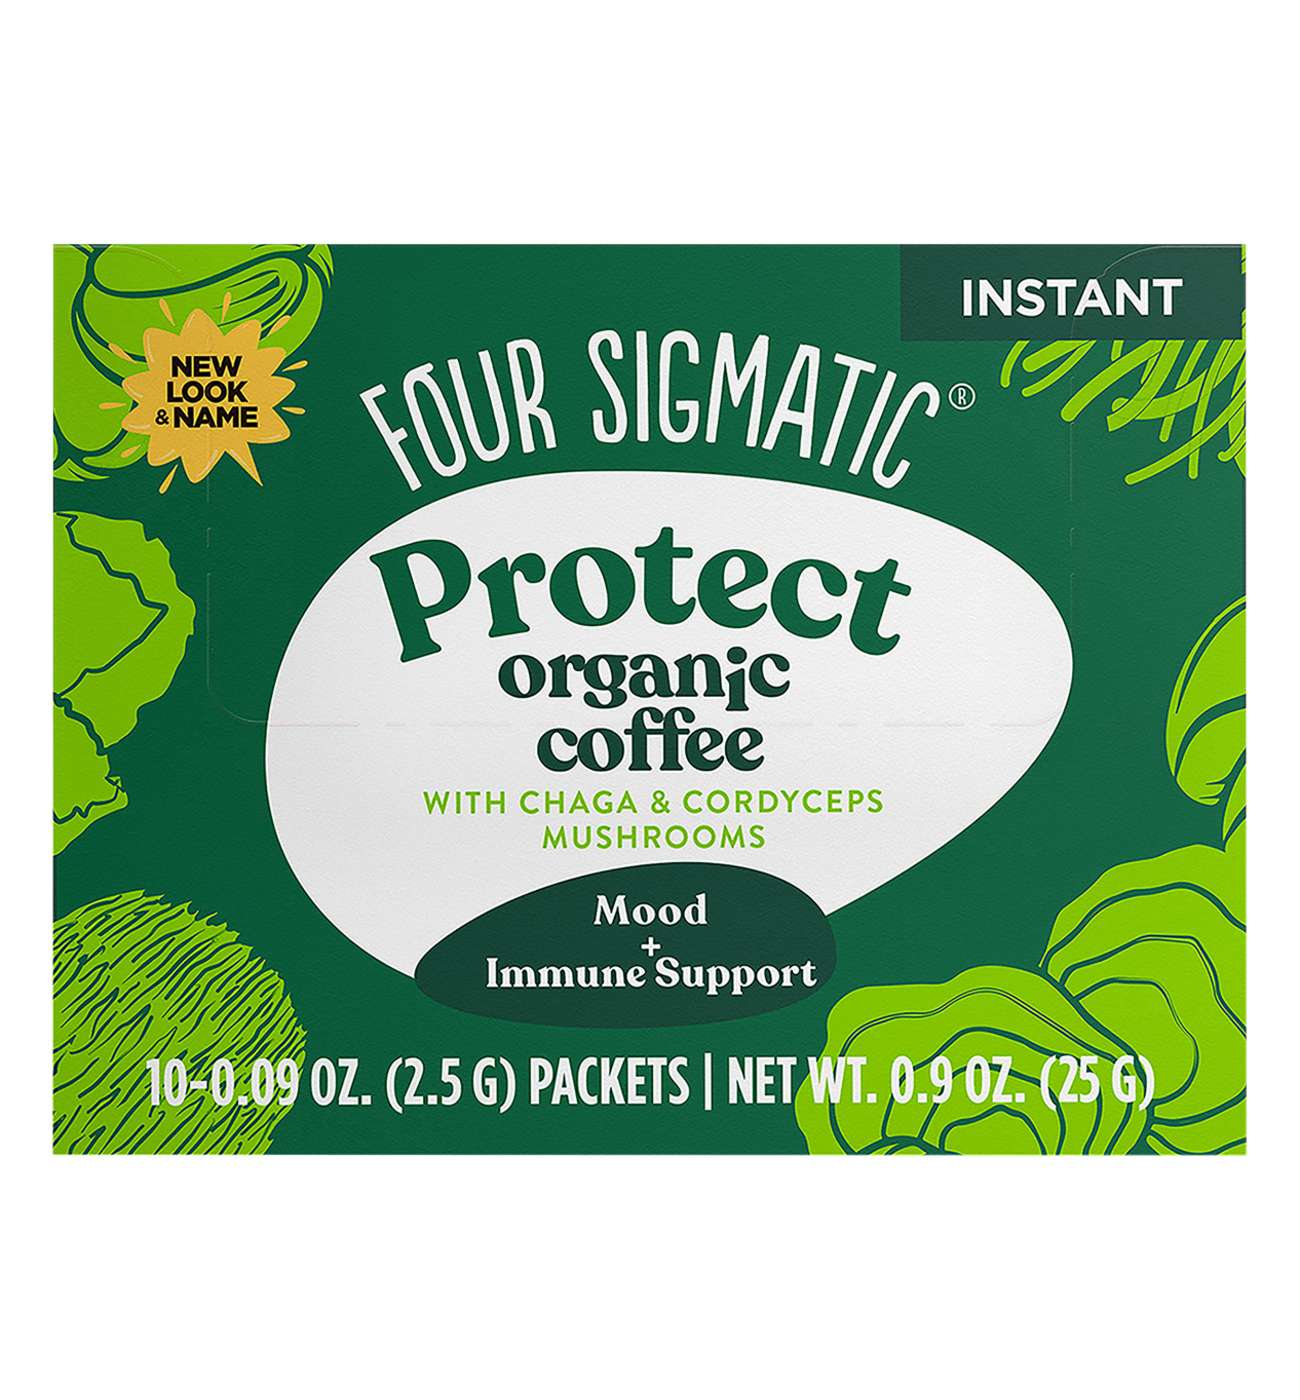 Four Sigmatic Protect Organic Coffee Mix Packets; image 1 of 4